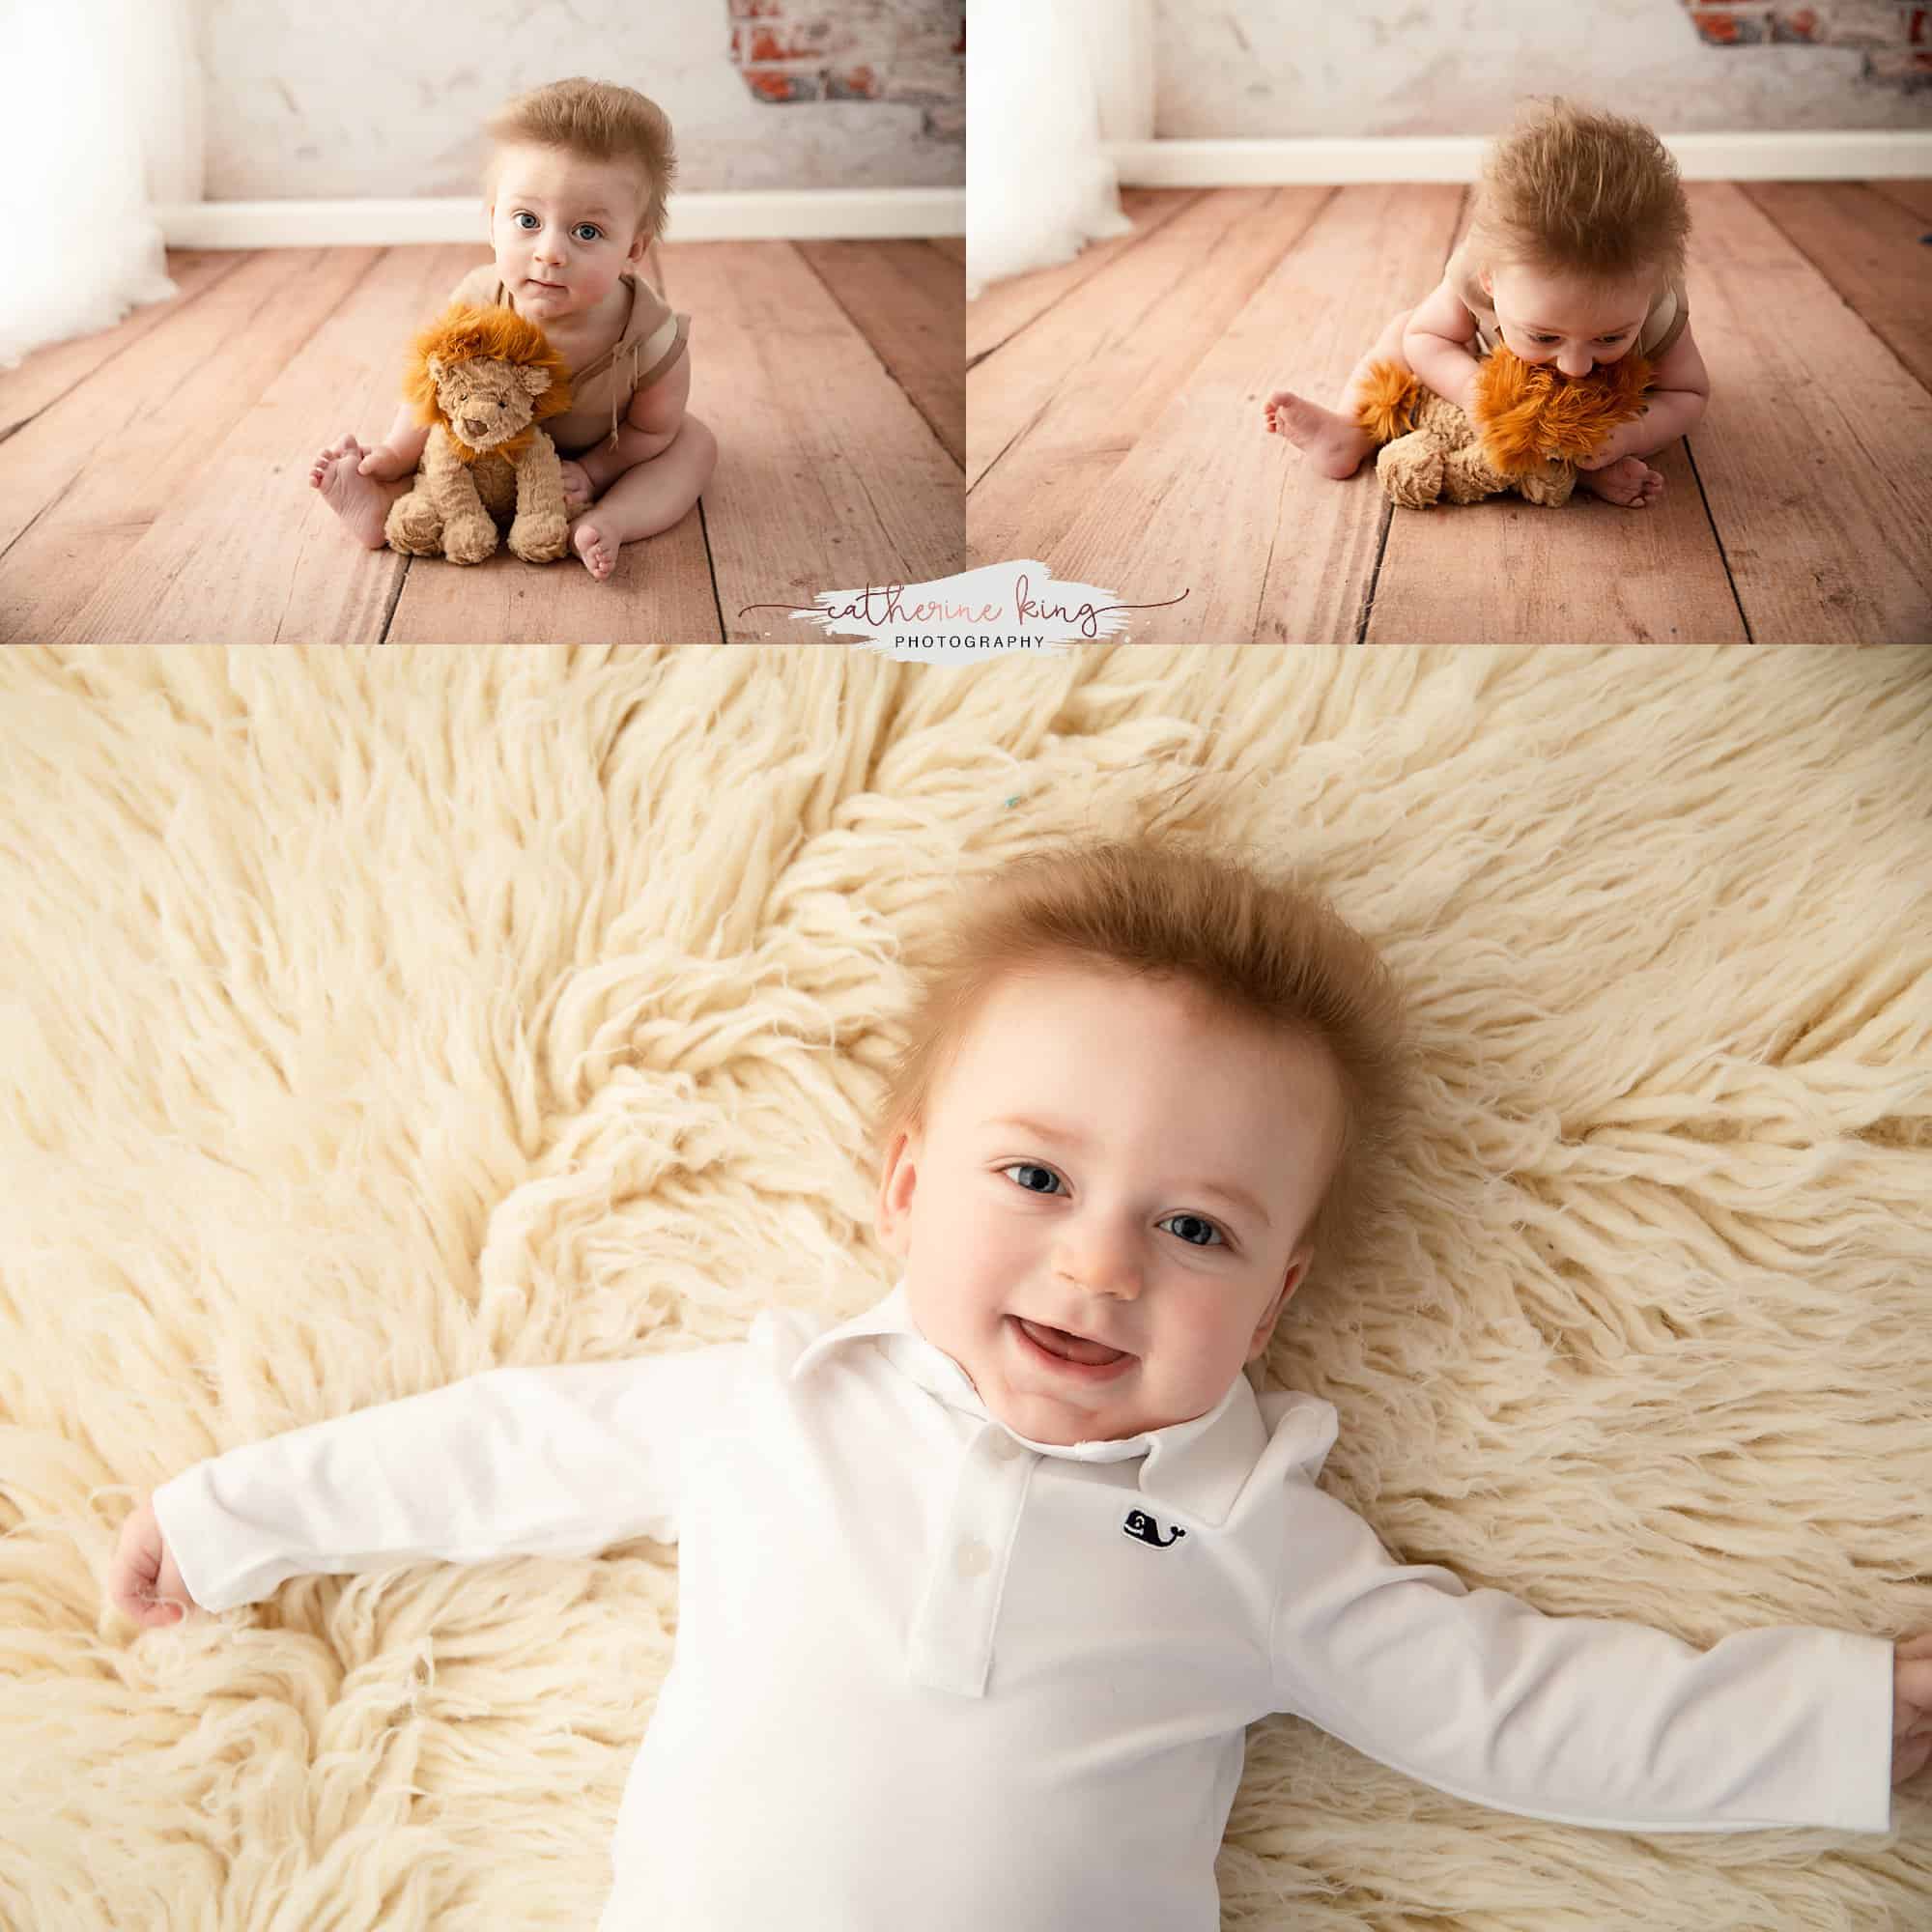 Jack's Sitter Milestone Photography session in Madison CT baby photography studio